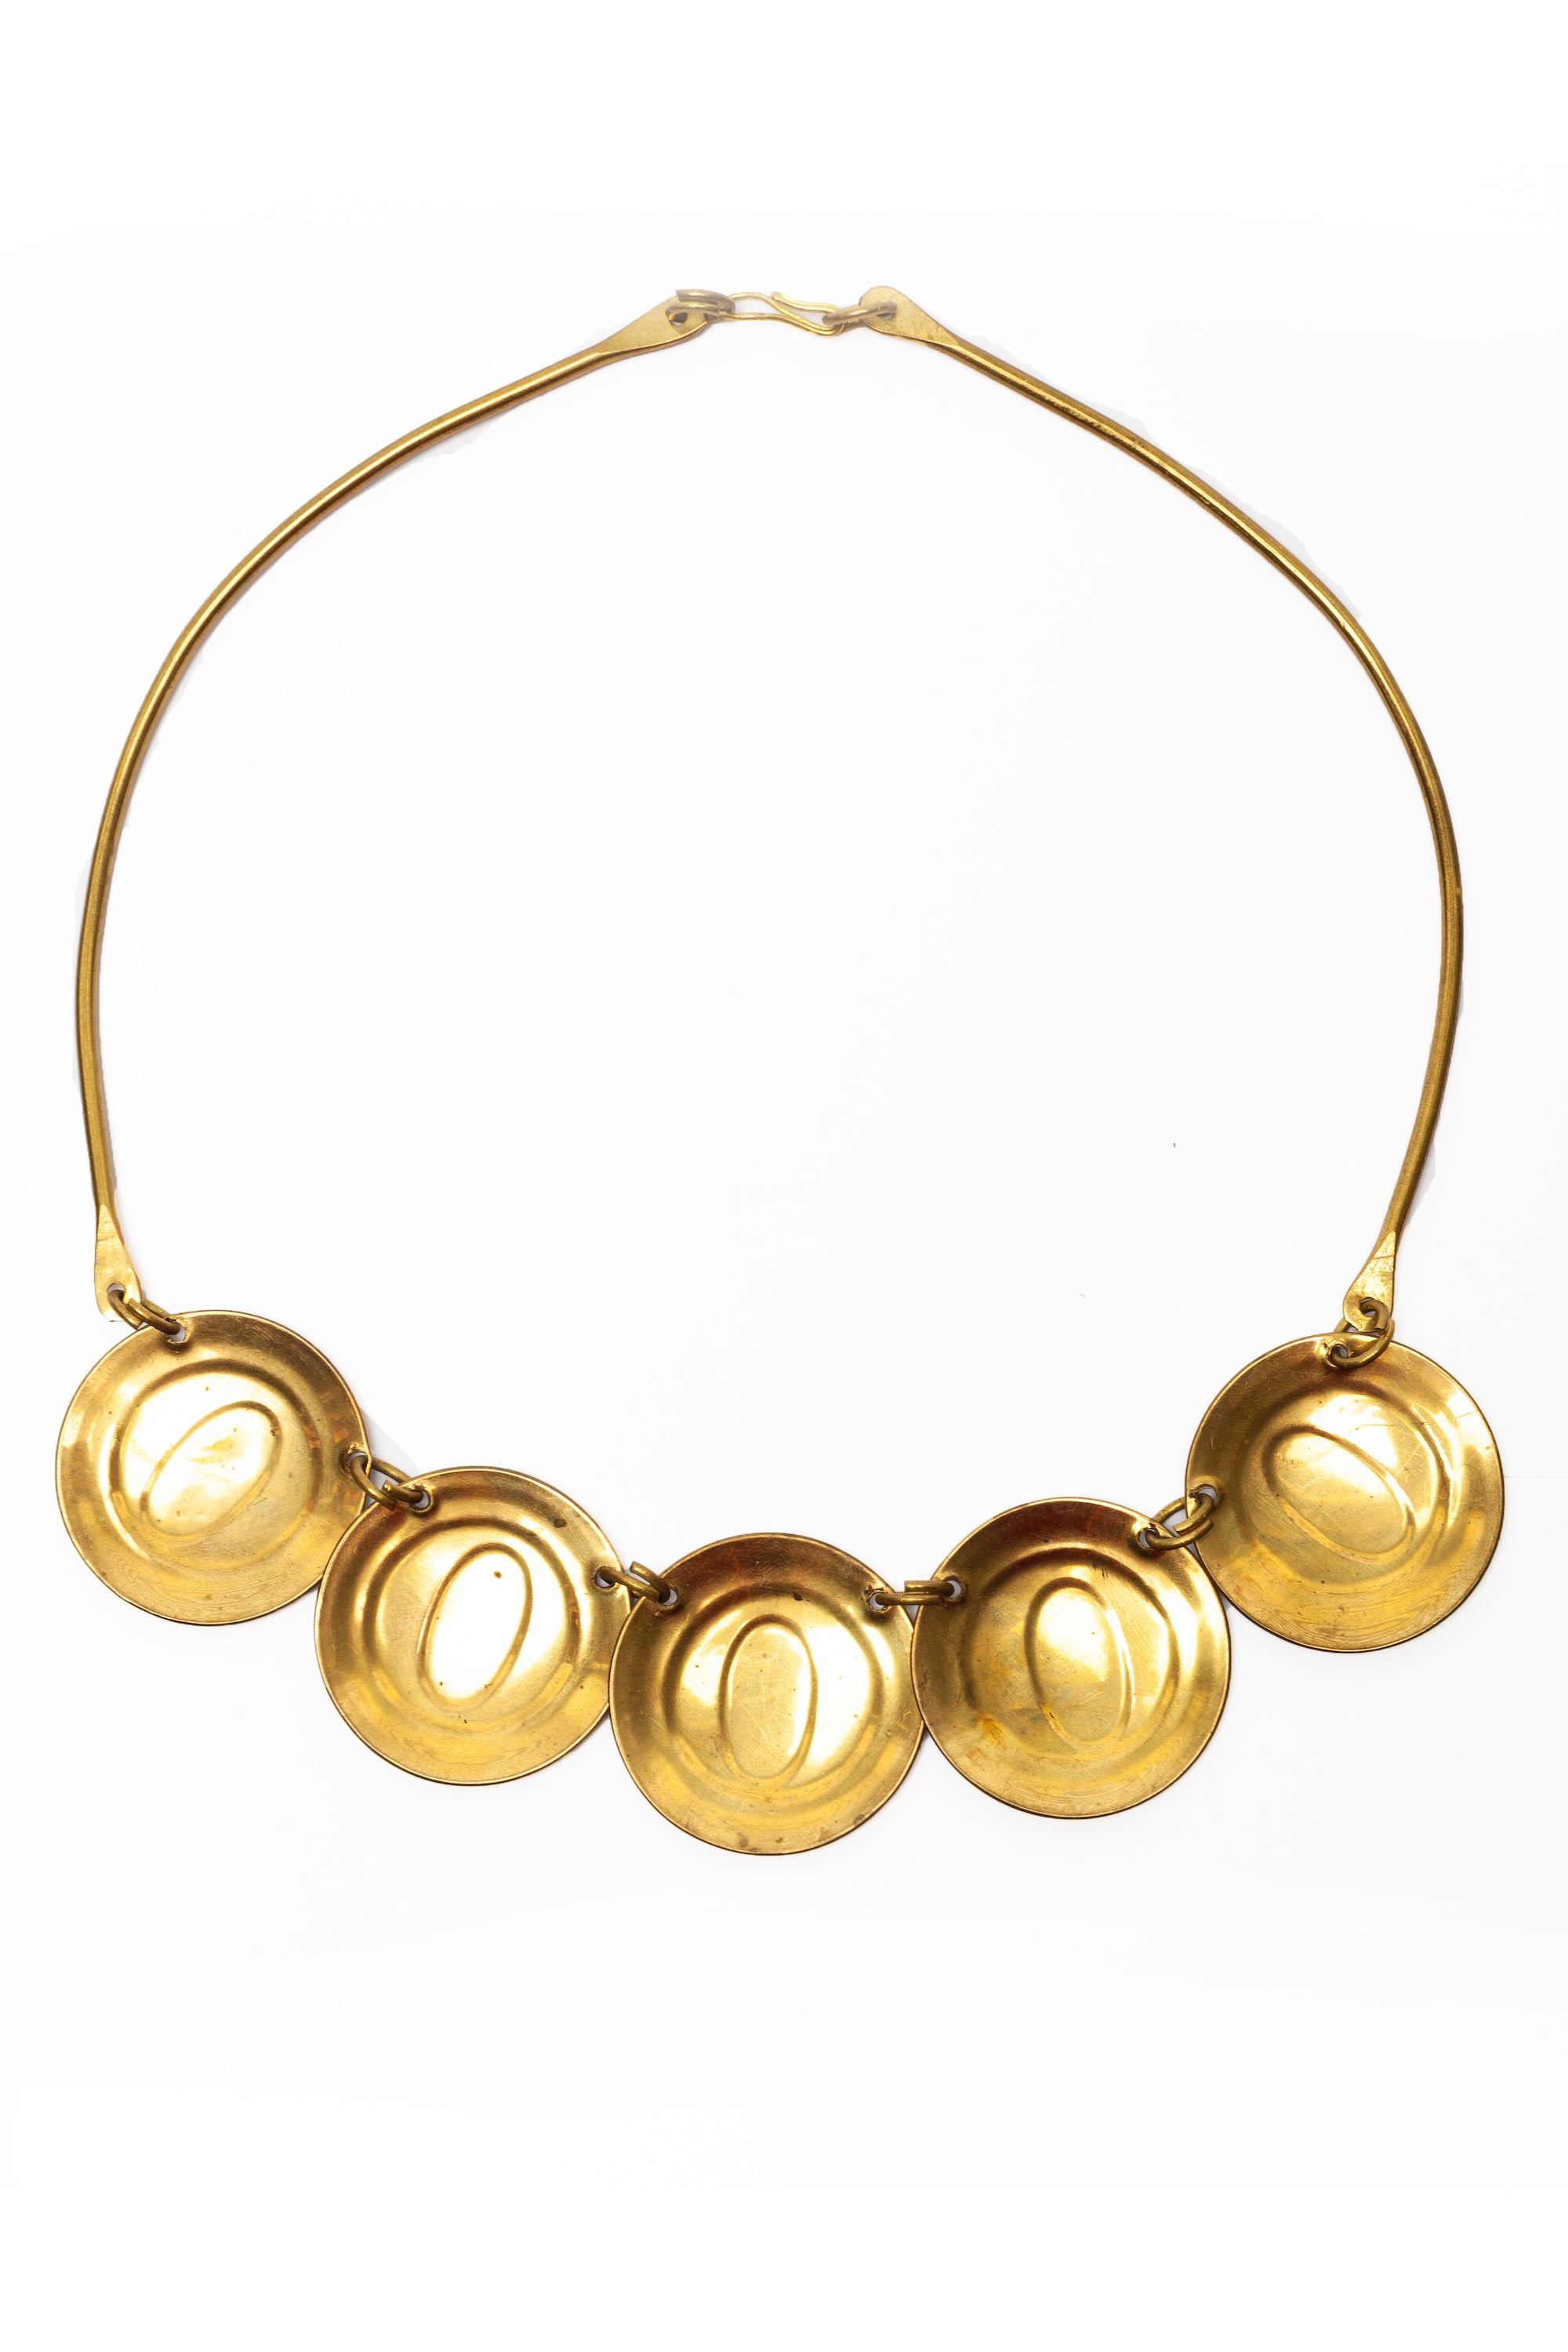 Vintage <br> 1960's/70's mexican brass metal choker necklace